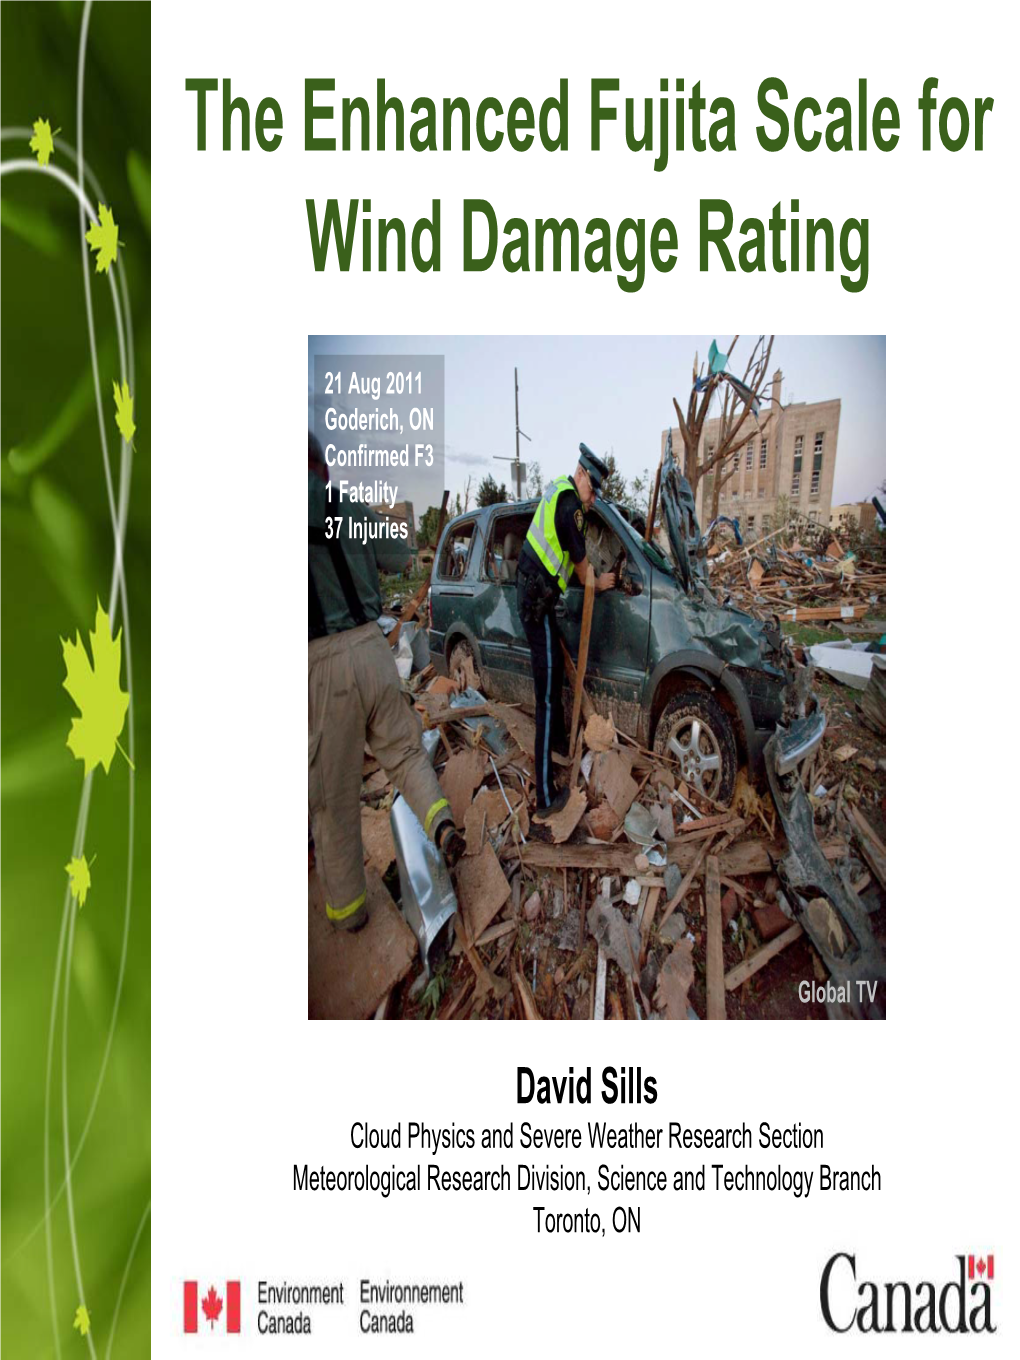 The Enhanced Fujita Scale for Wind Damage Rating